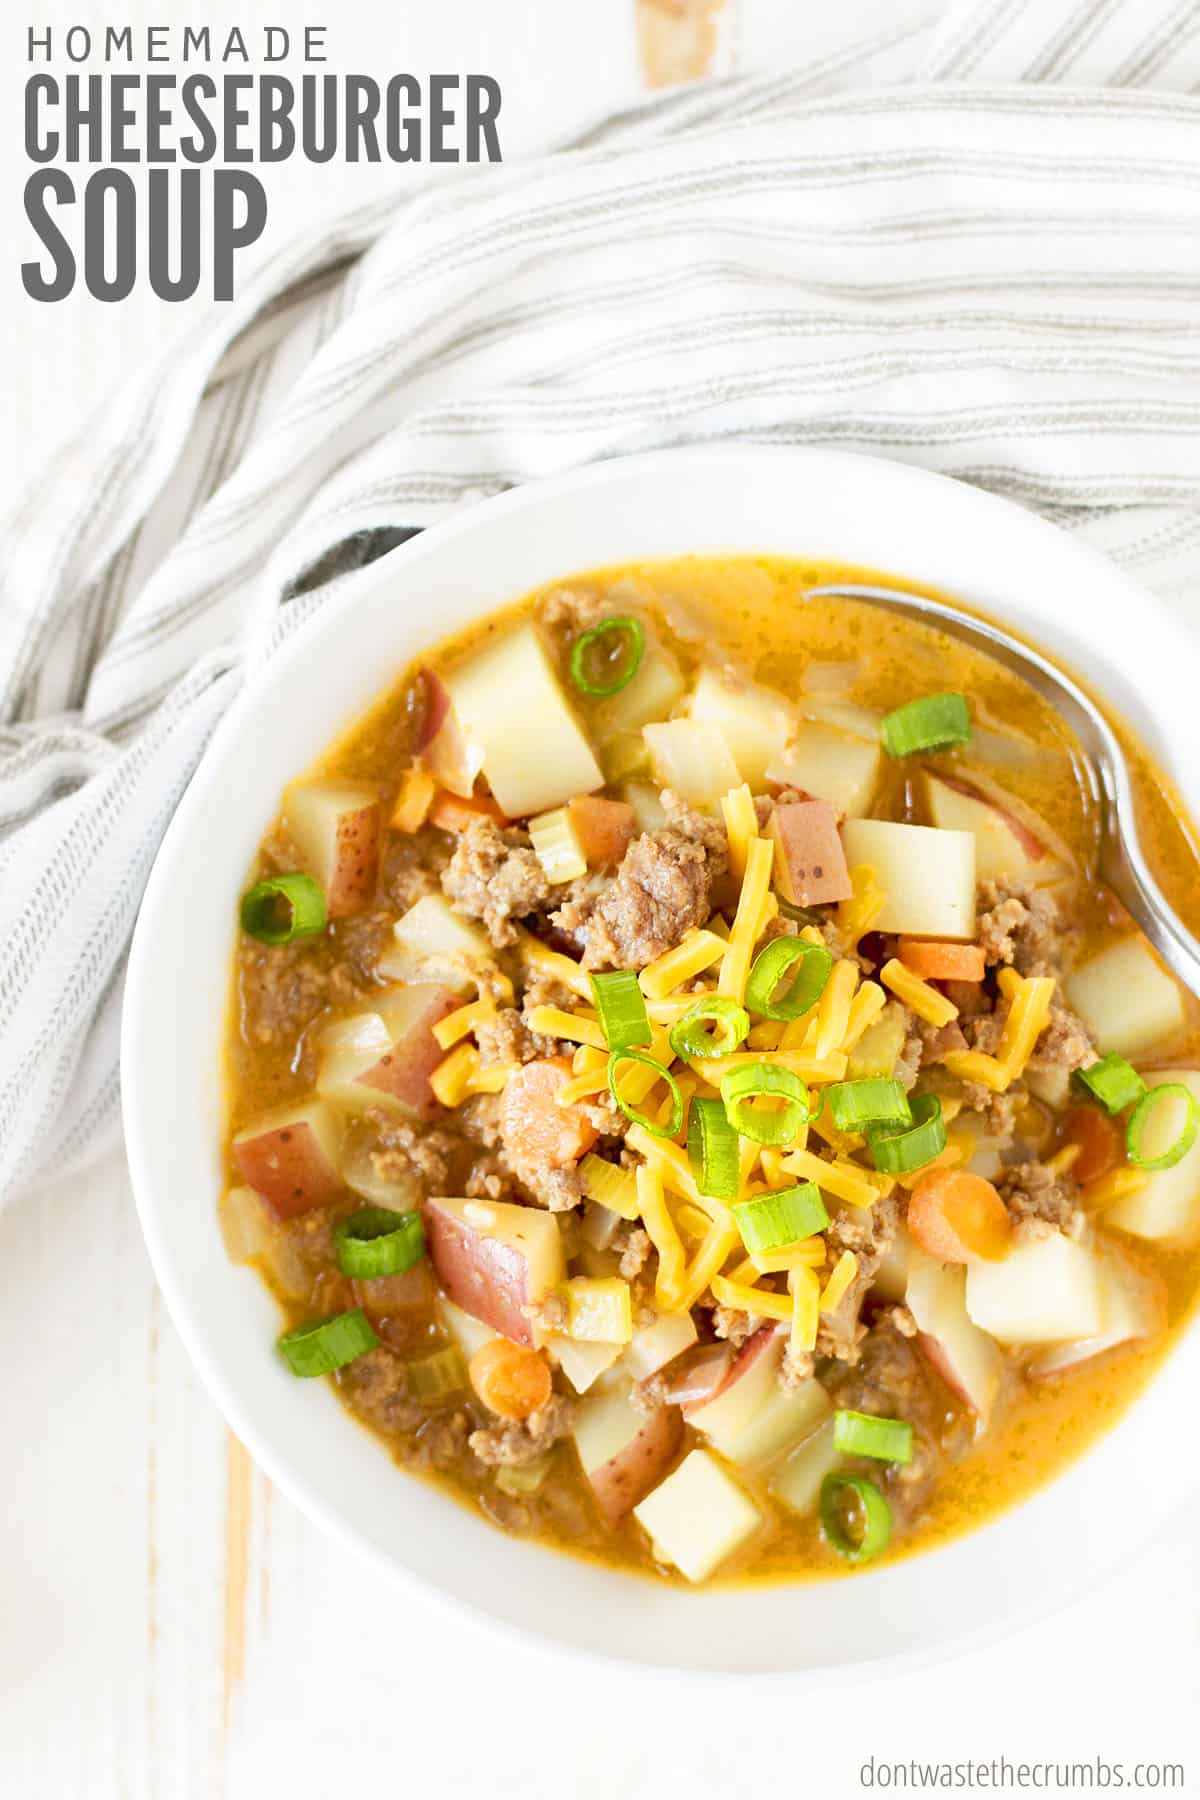 My kids say this Cheeseburger Soup is award-winning - it's their absolute favorite! Thick and hearty with ground beef, diced potatoes, and a creamy sauce - it’s affordable, gluten-free, freezer-friendly, and absolutely delicious!